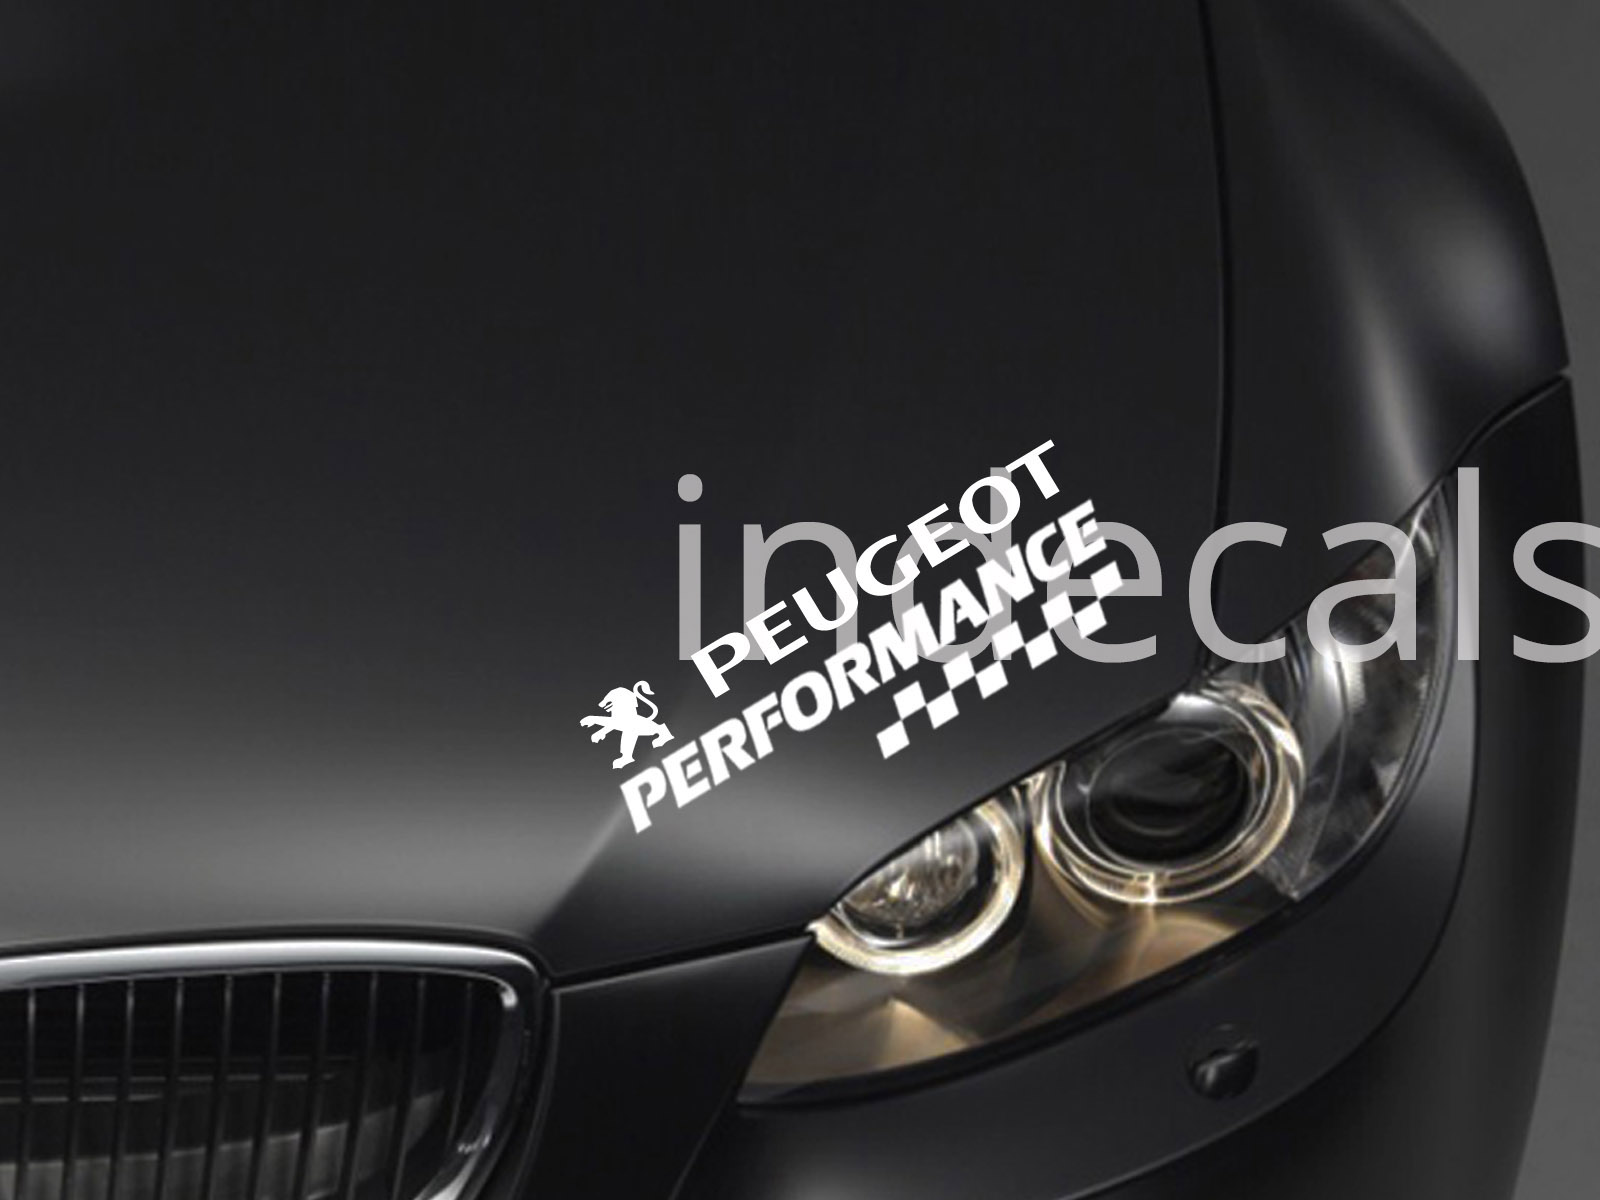 1 x Peugeot Performance Sticker for Eyebrow - White